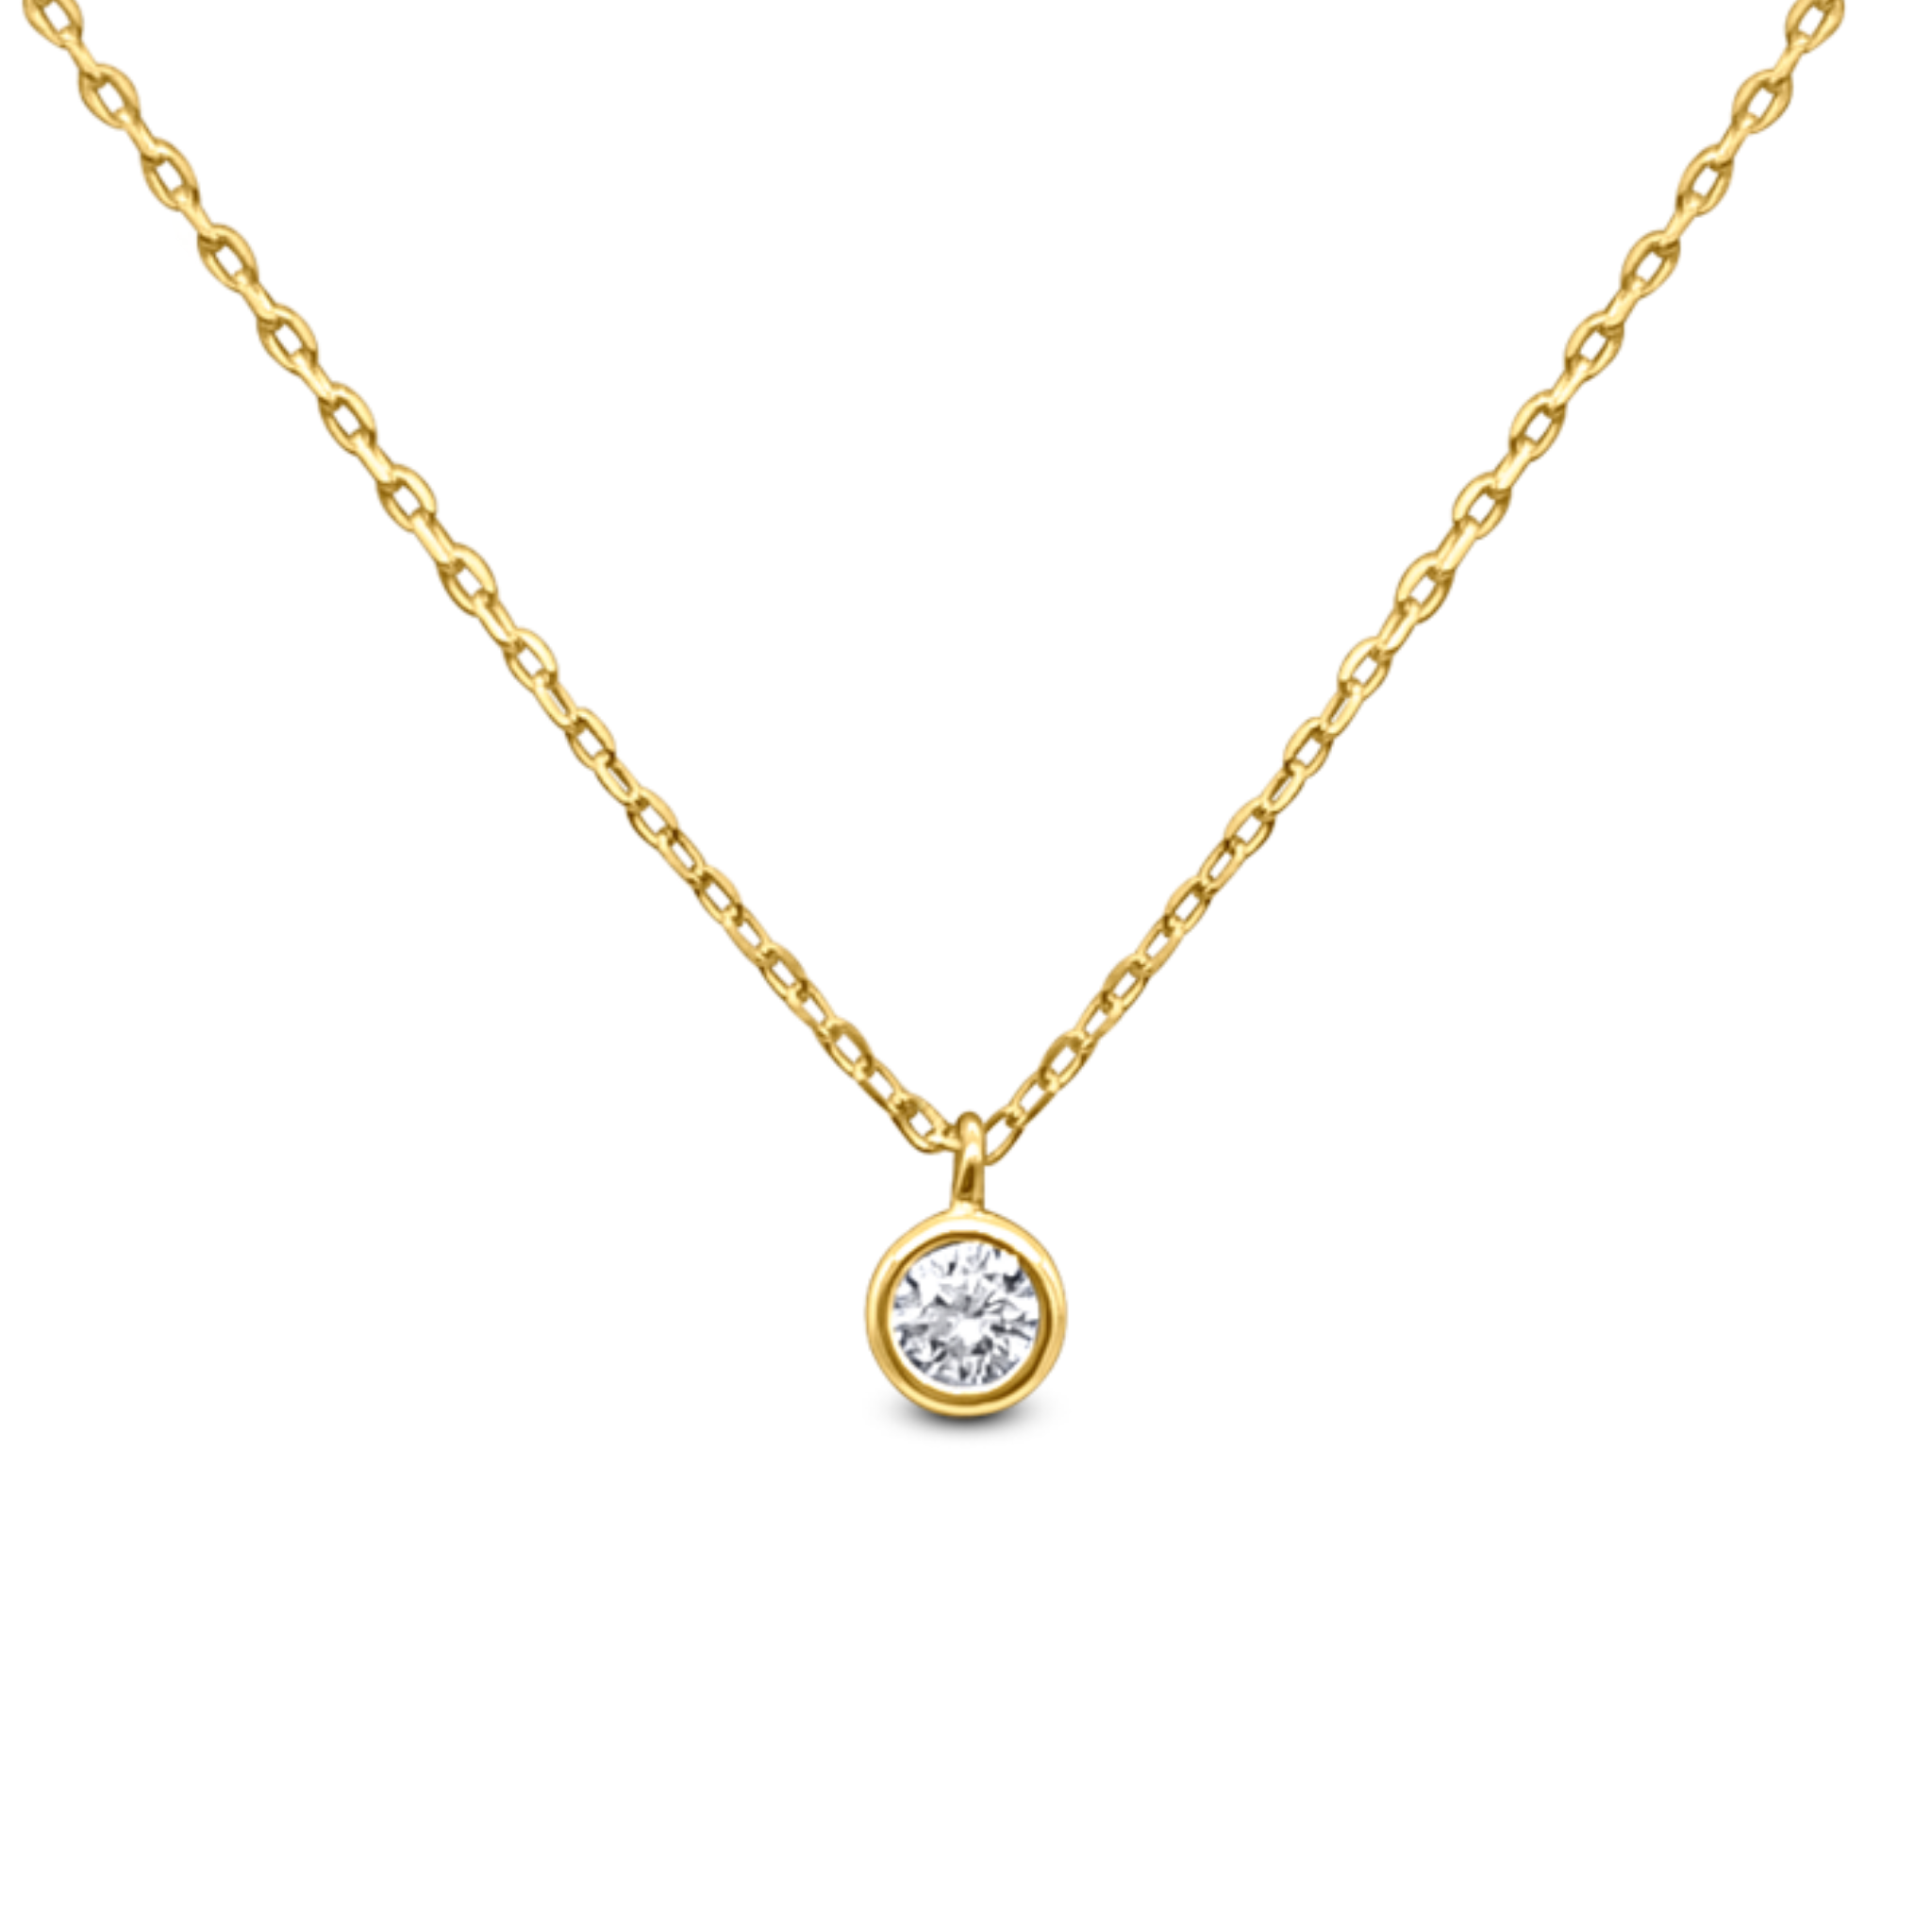 Starlight Solitaire Pendant Necklace in Gold